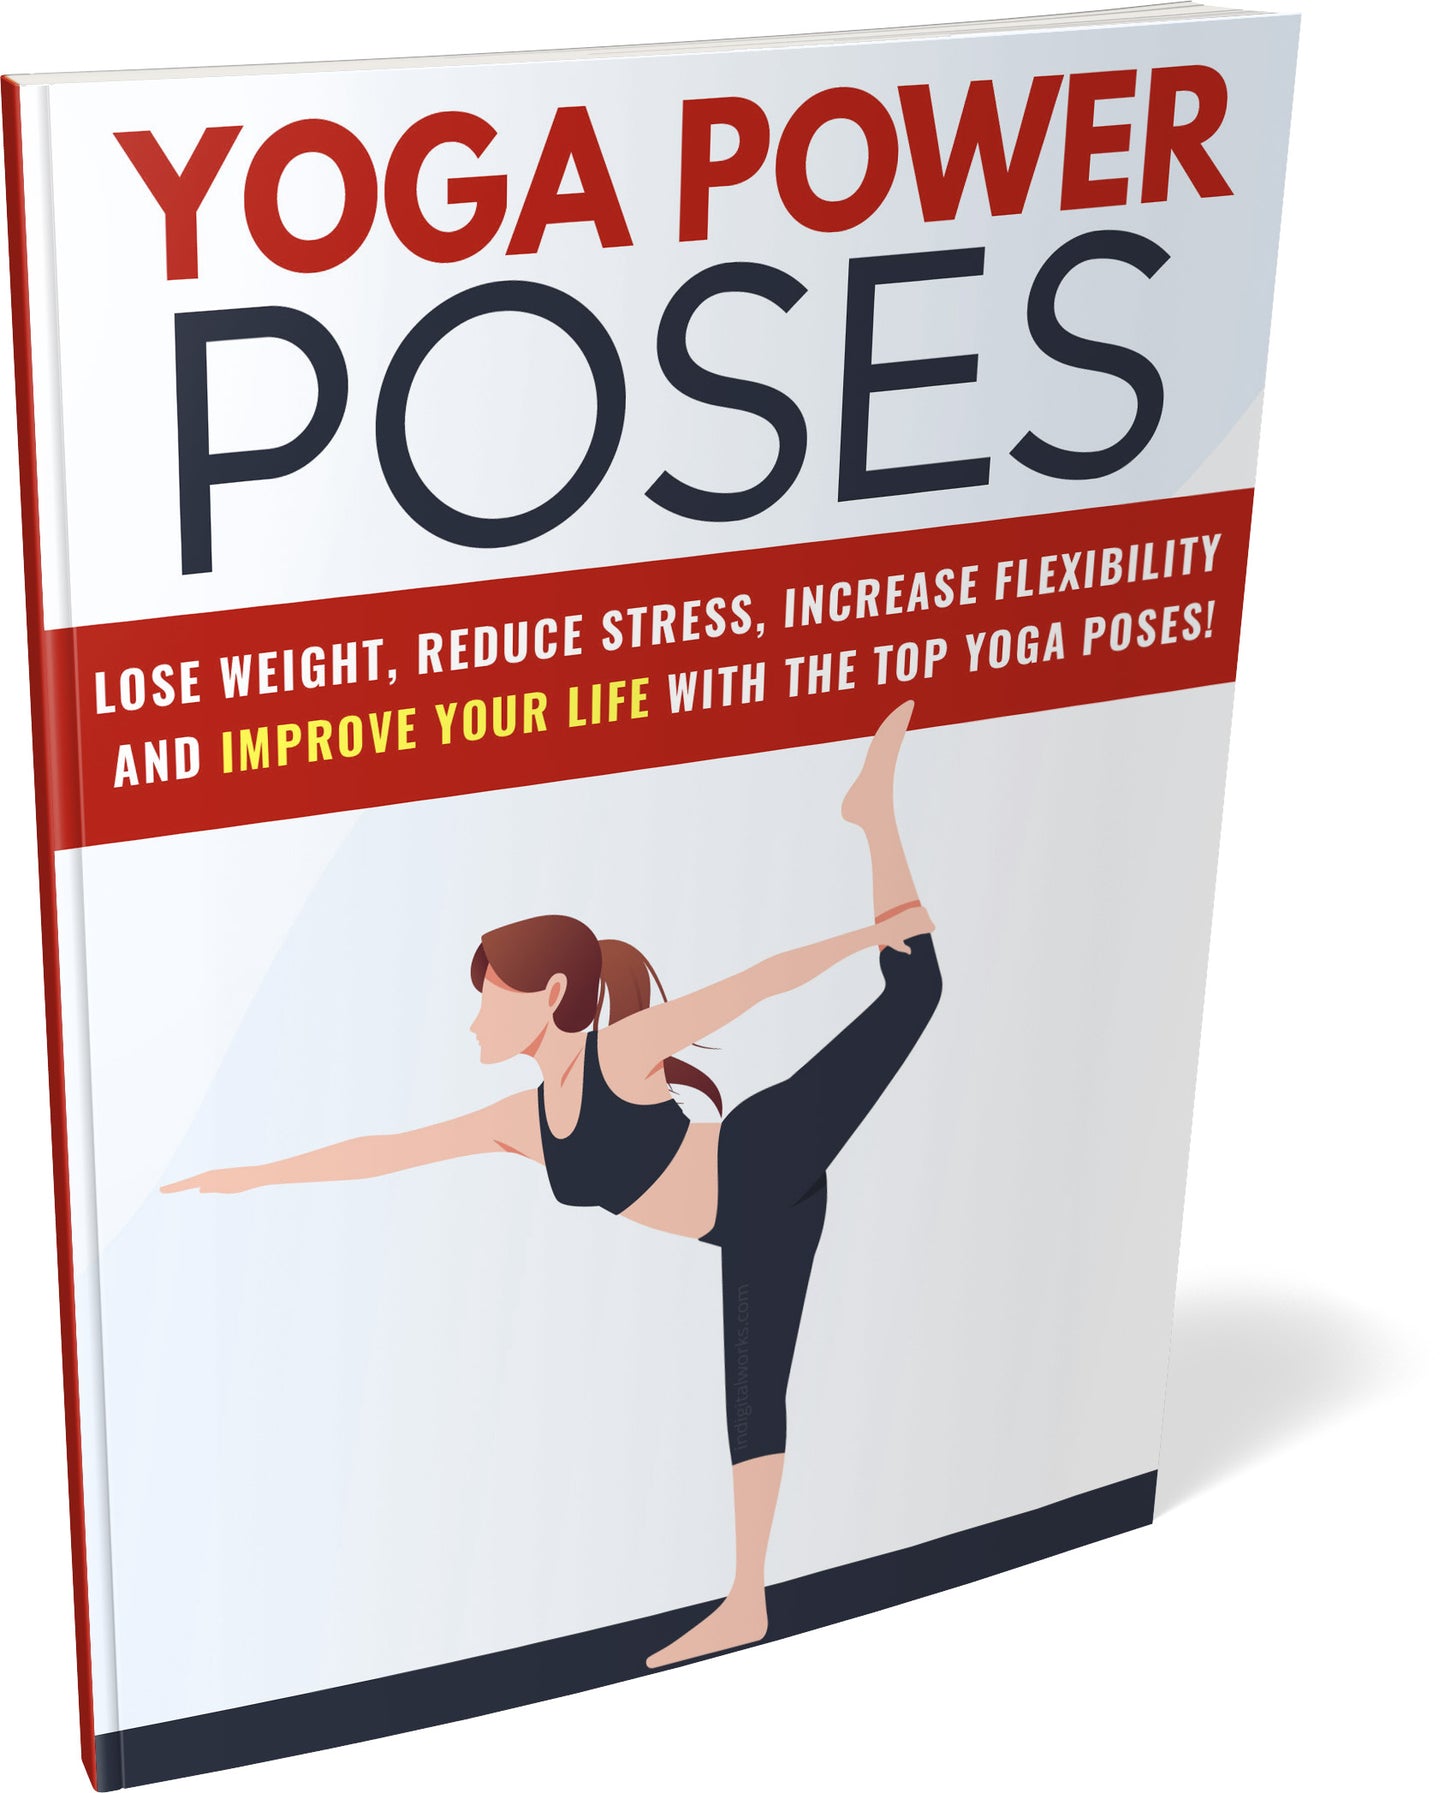 Yoga Power Poses "stretch it out to reduce stress ladies-A self-love journey"